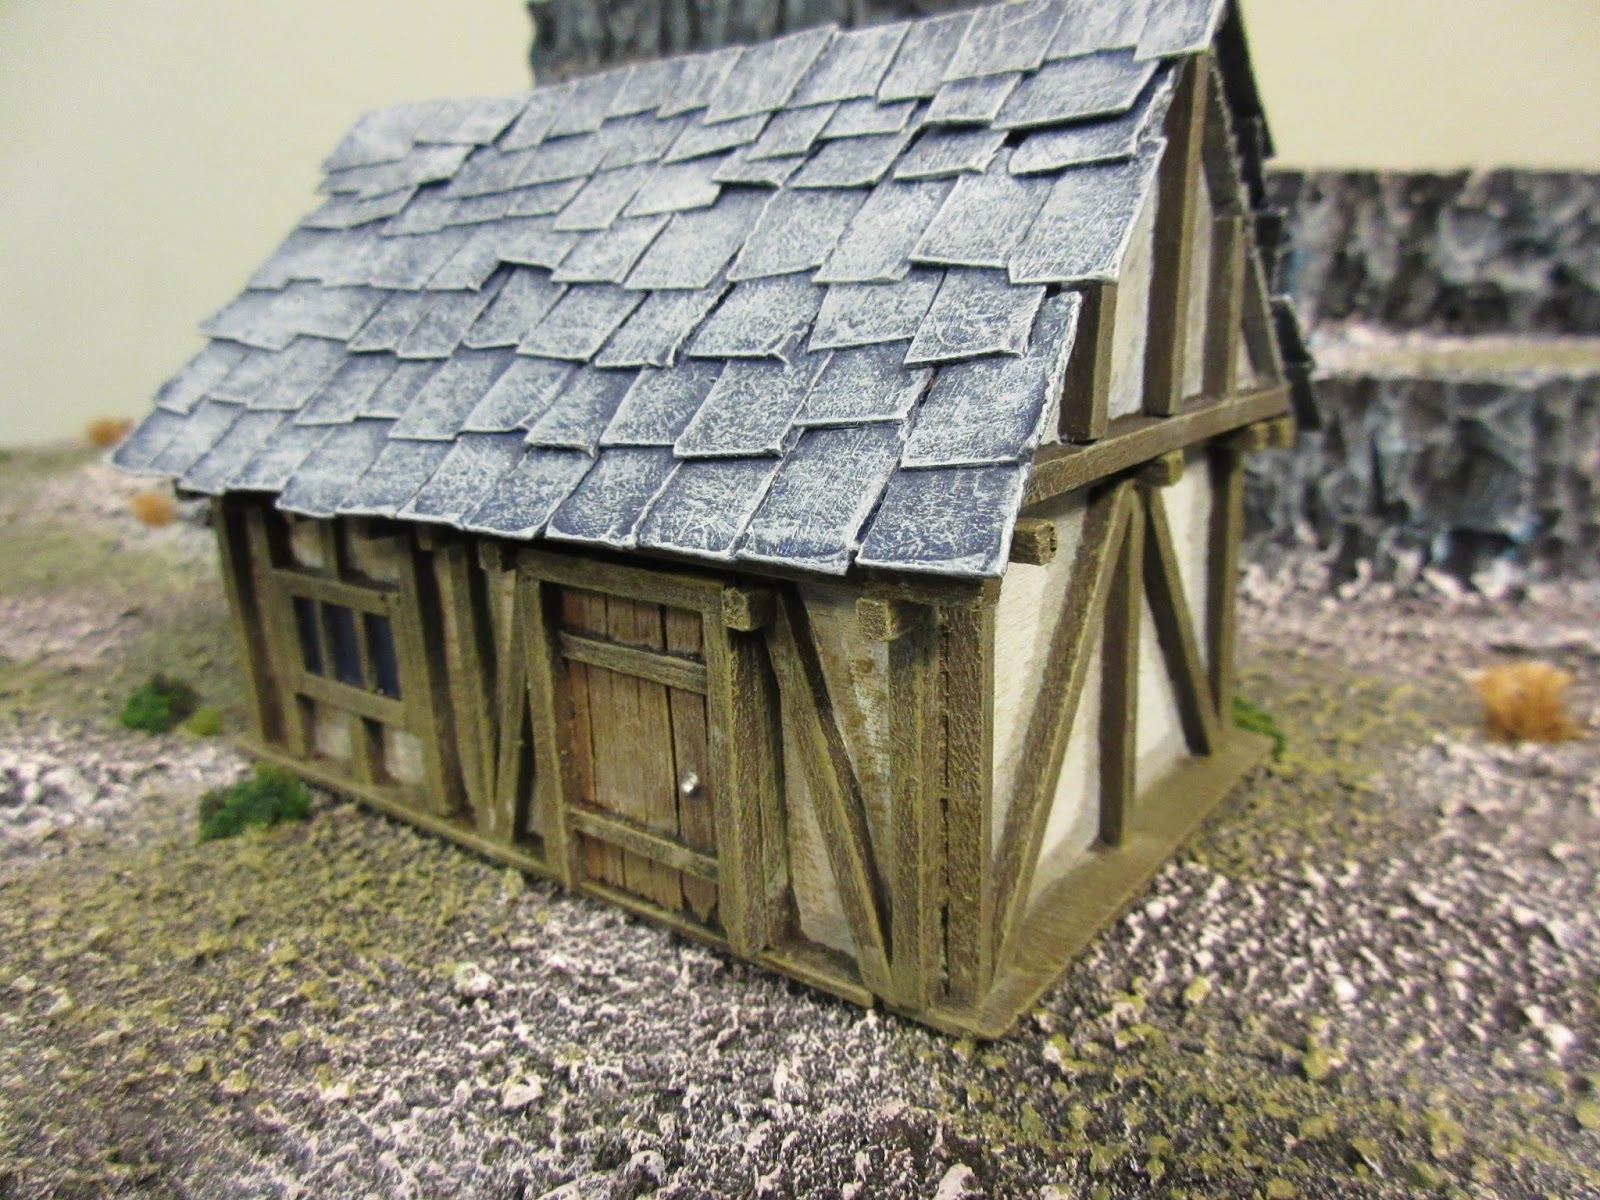 Mars-Miniatures: Cabin In The Woods - Making A Balsa Wood ...